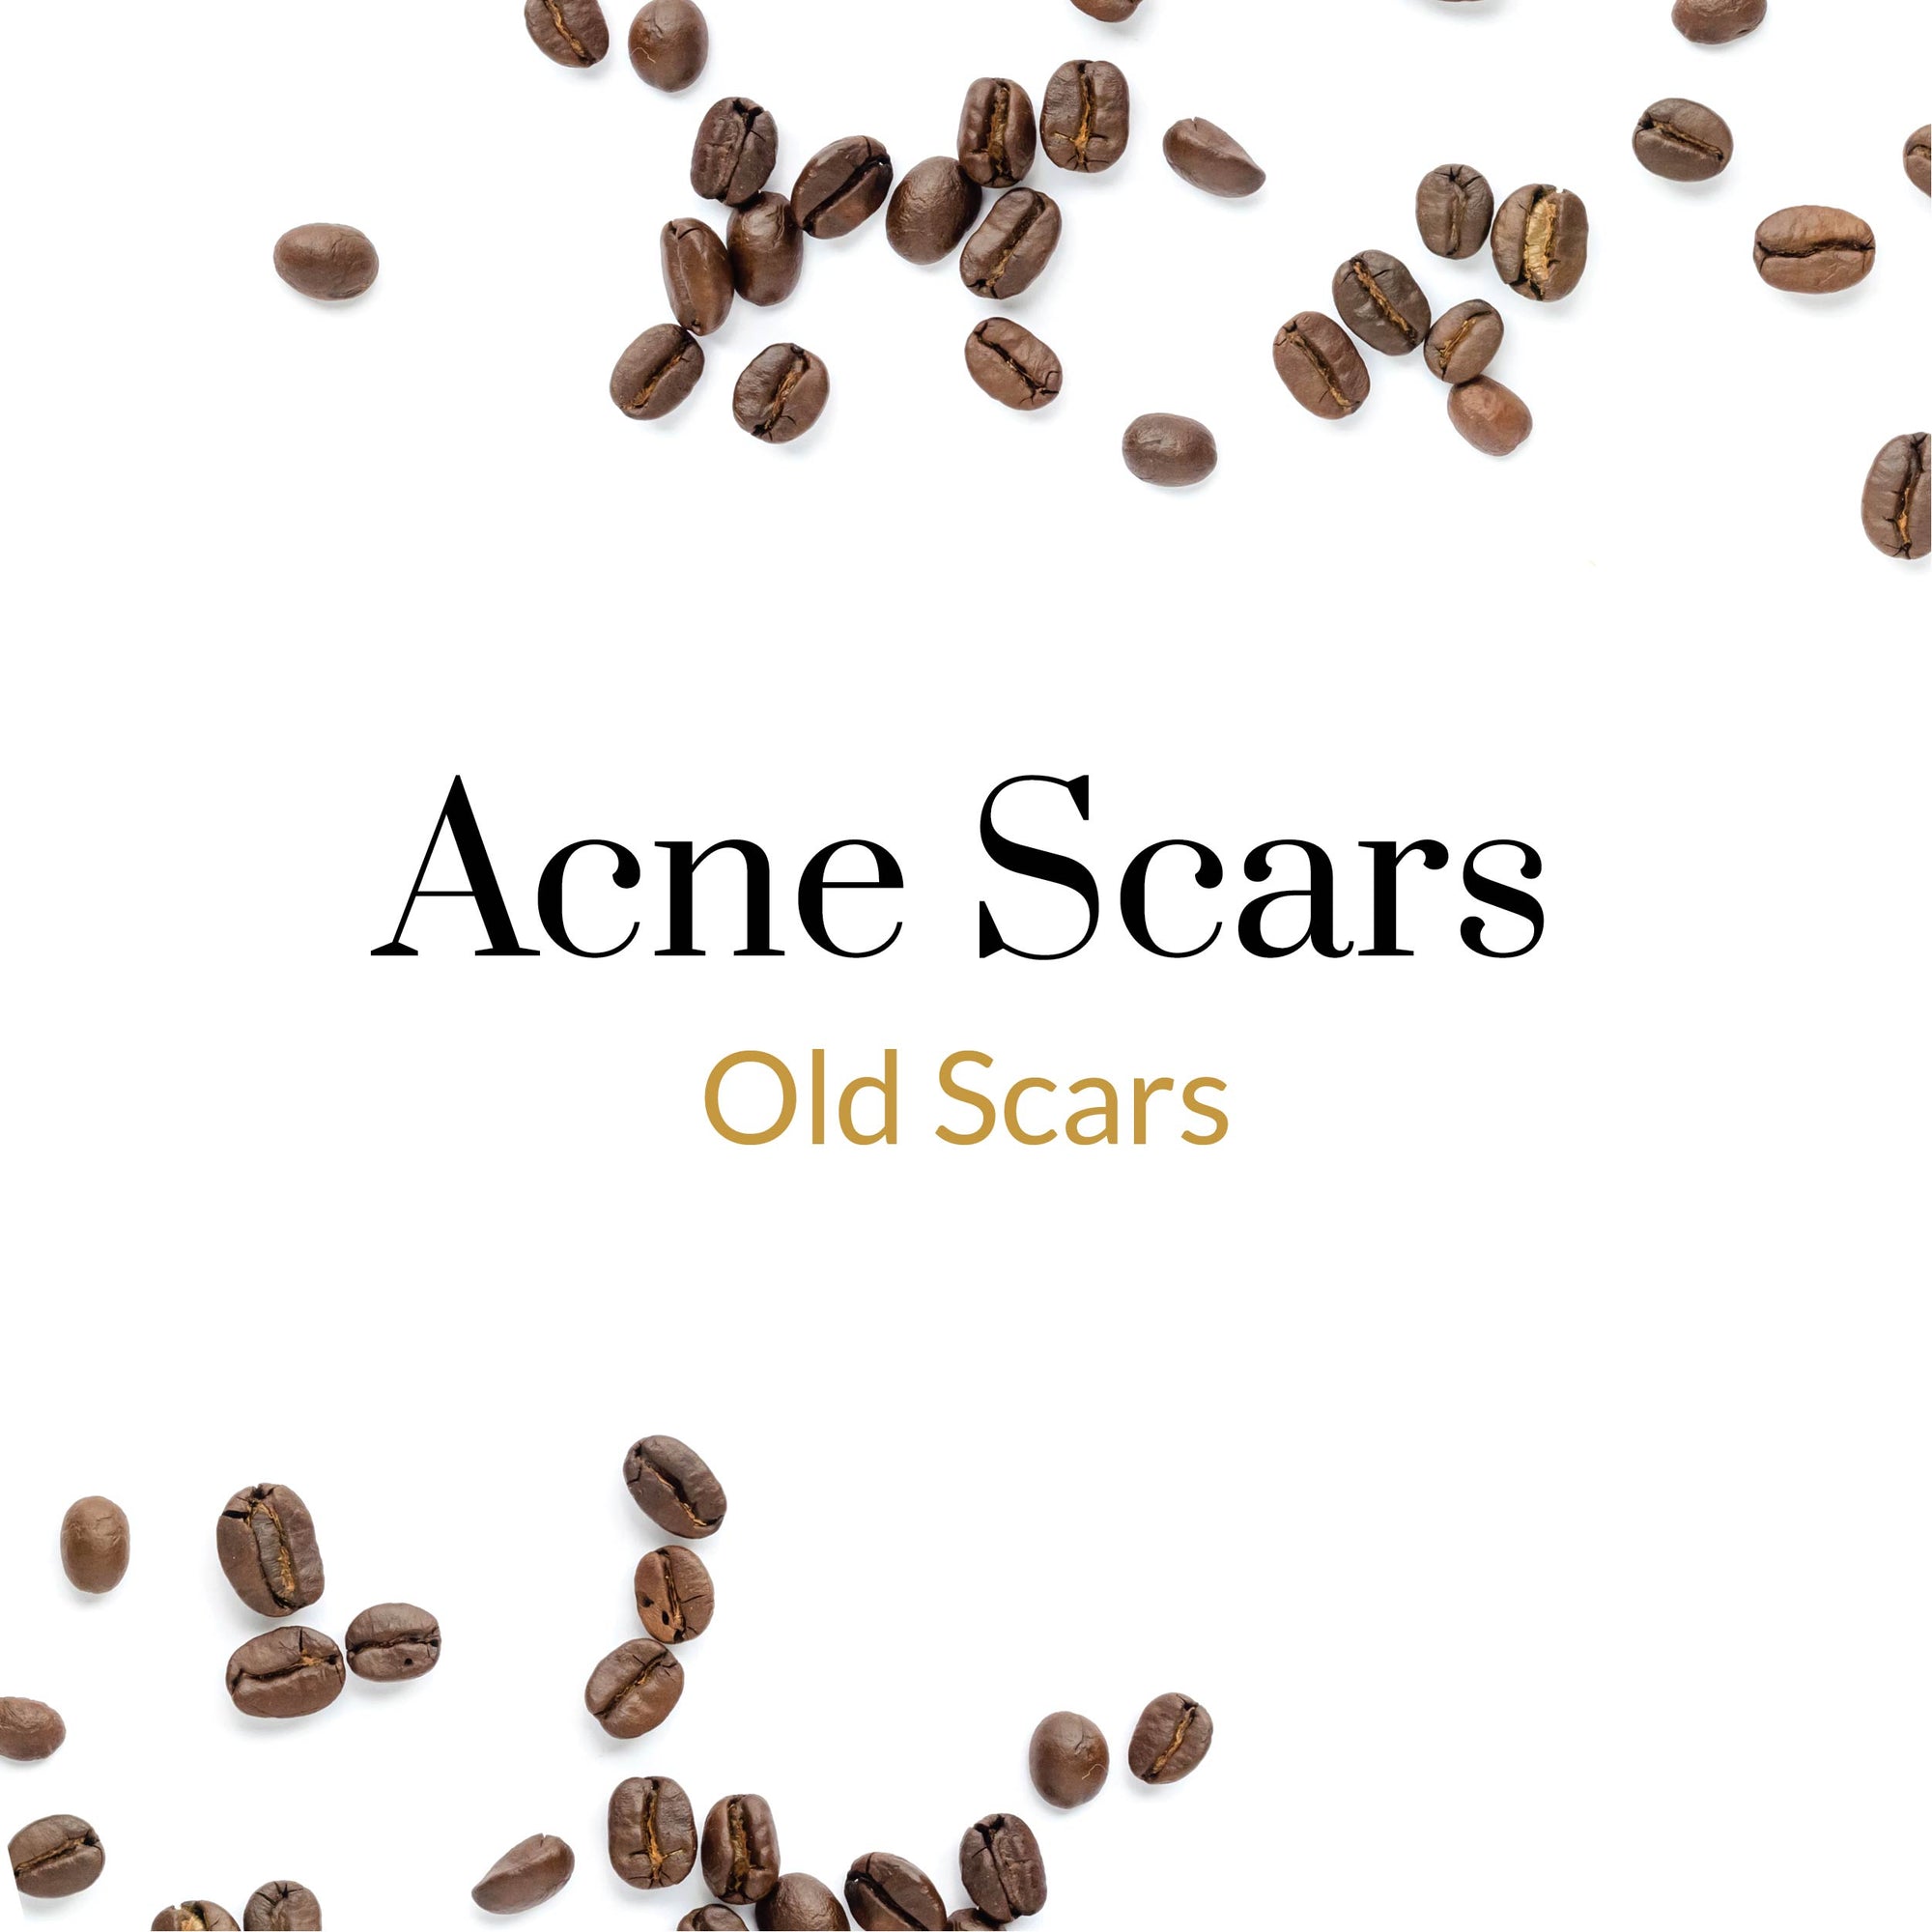 Old Scars - Acne